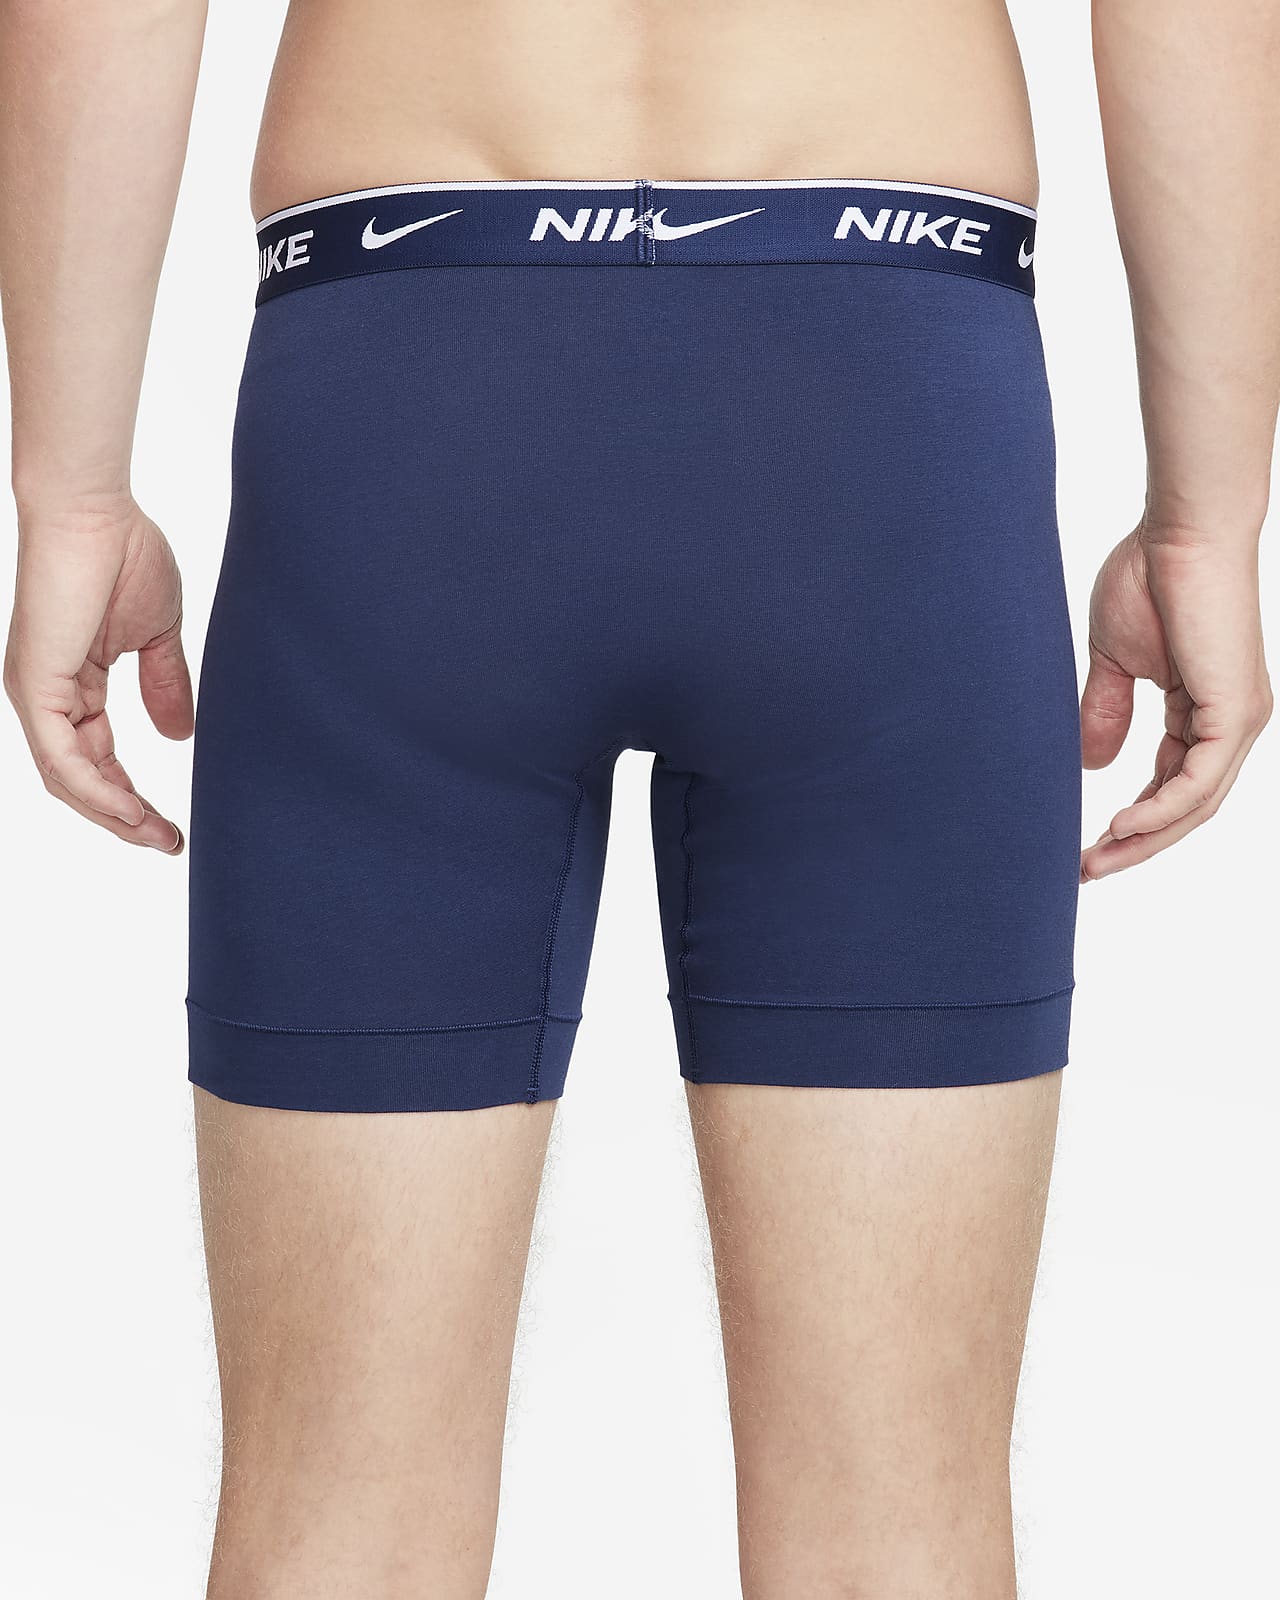 Nike Men's Dri-FIT Essential Cotton Stretch Boxer Briefs – 3 Pack, Small, Obsidian/Cool Grey